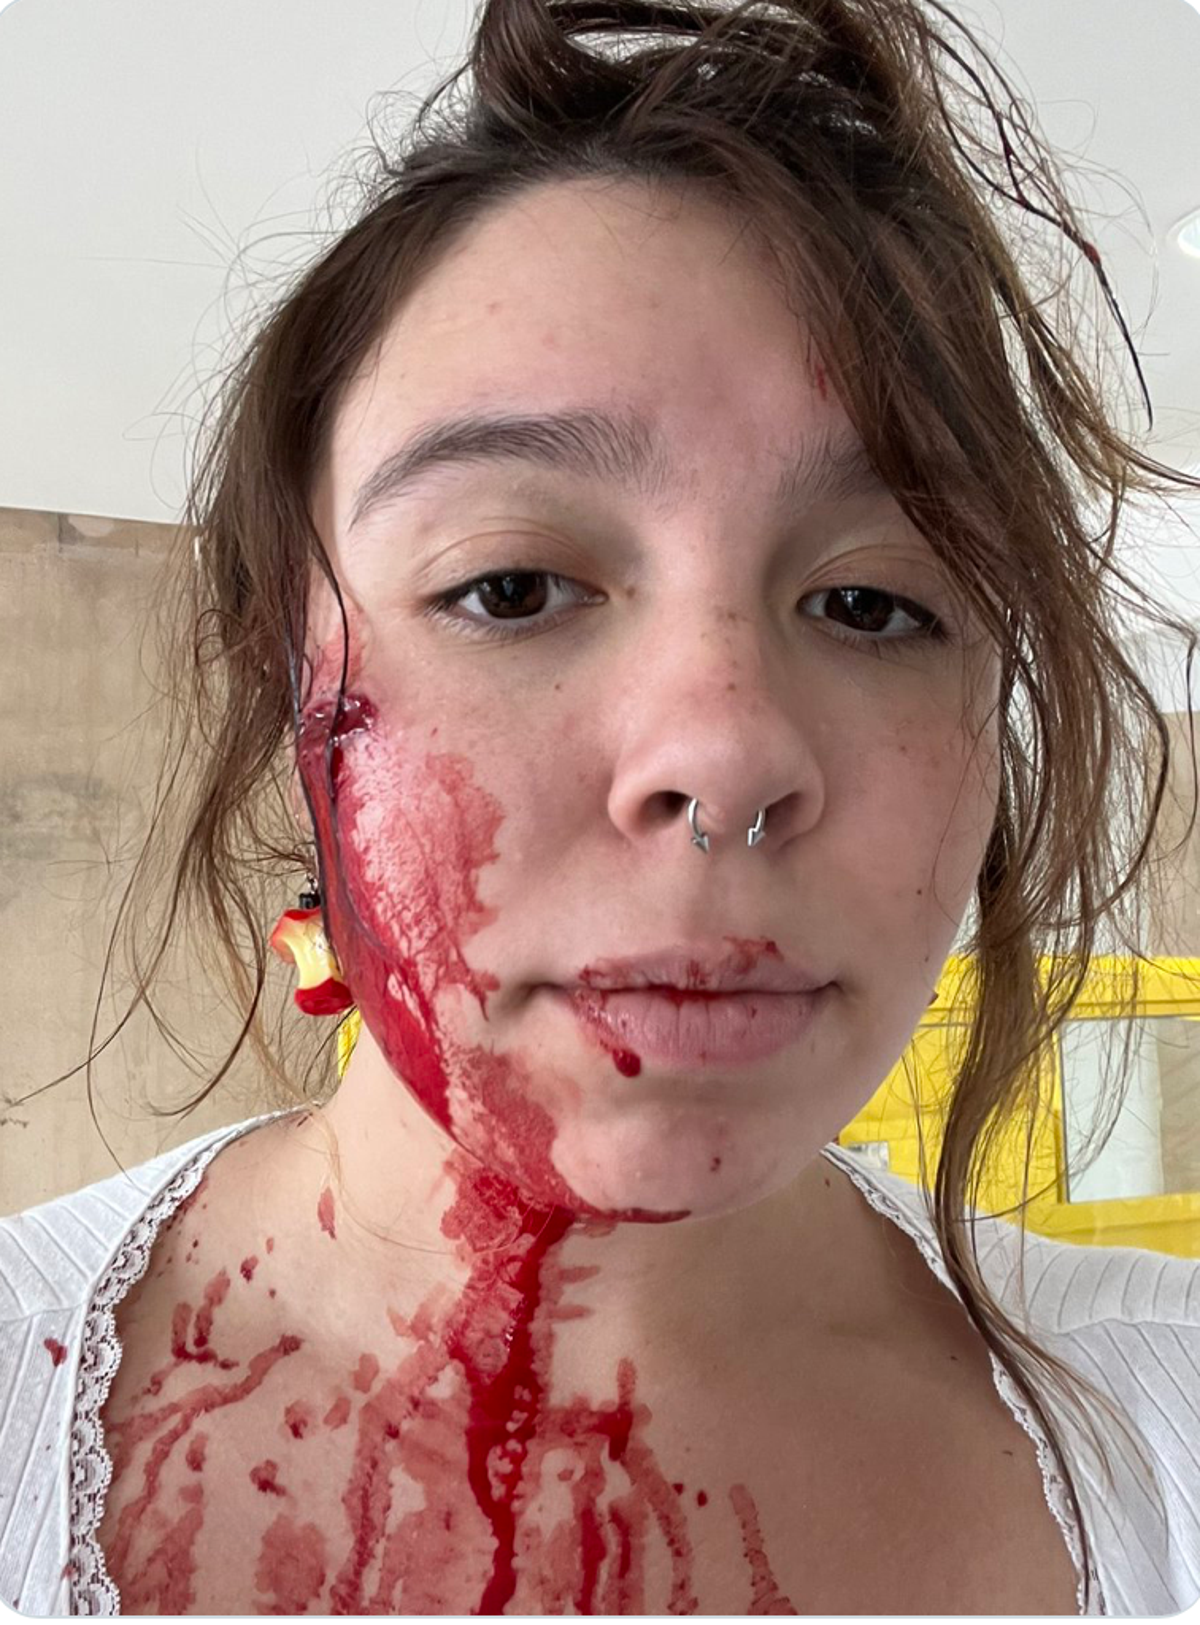 Highland Park shooting victim shares gruesome photo of her face grazed by bullet